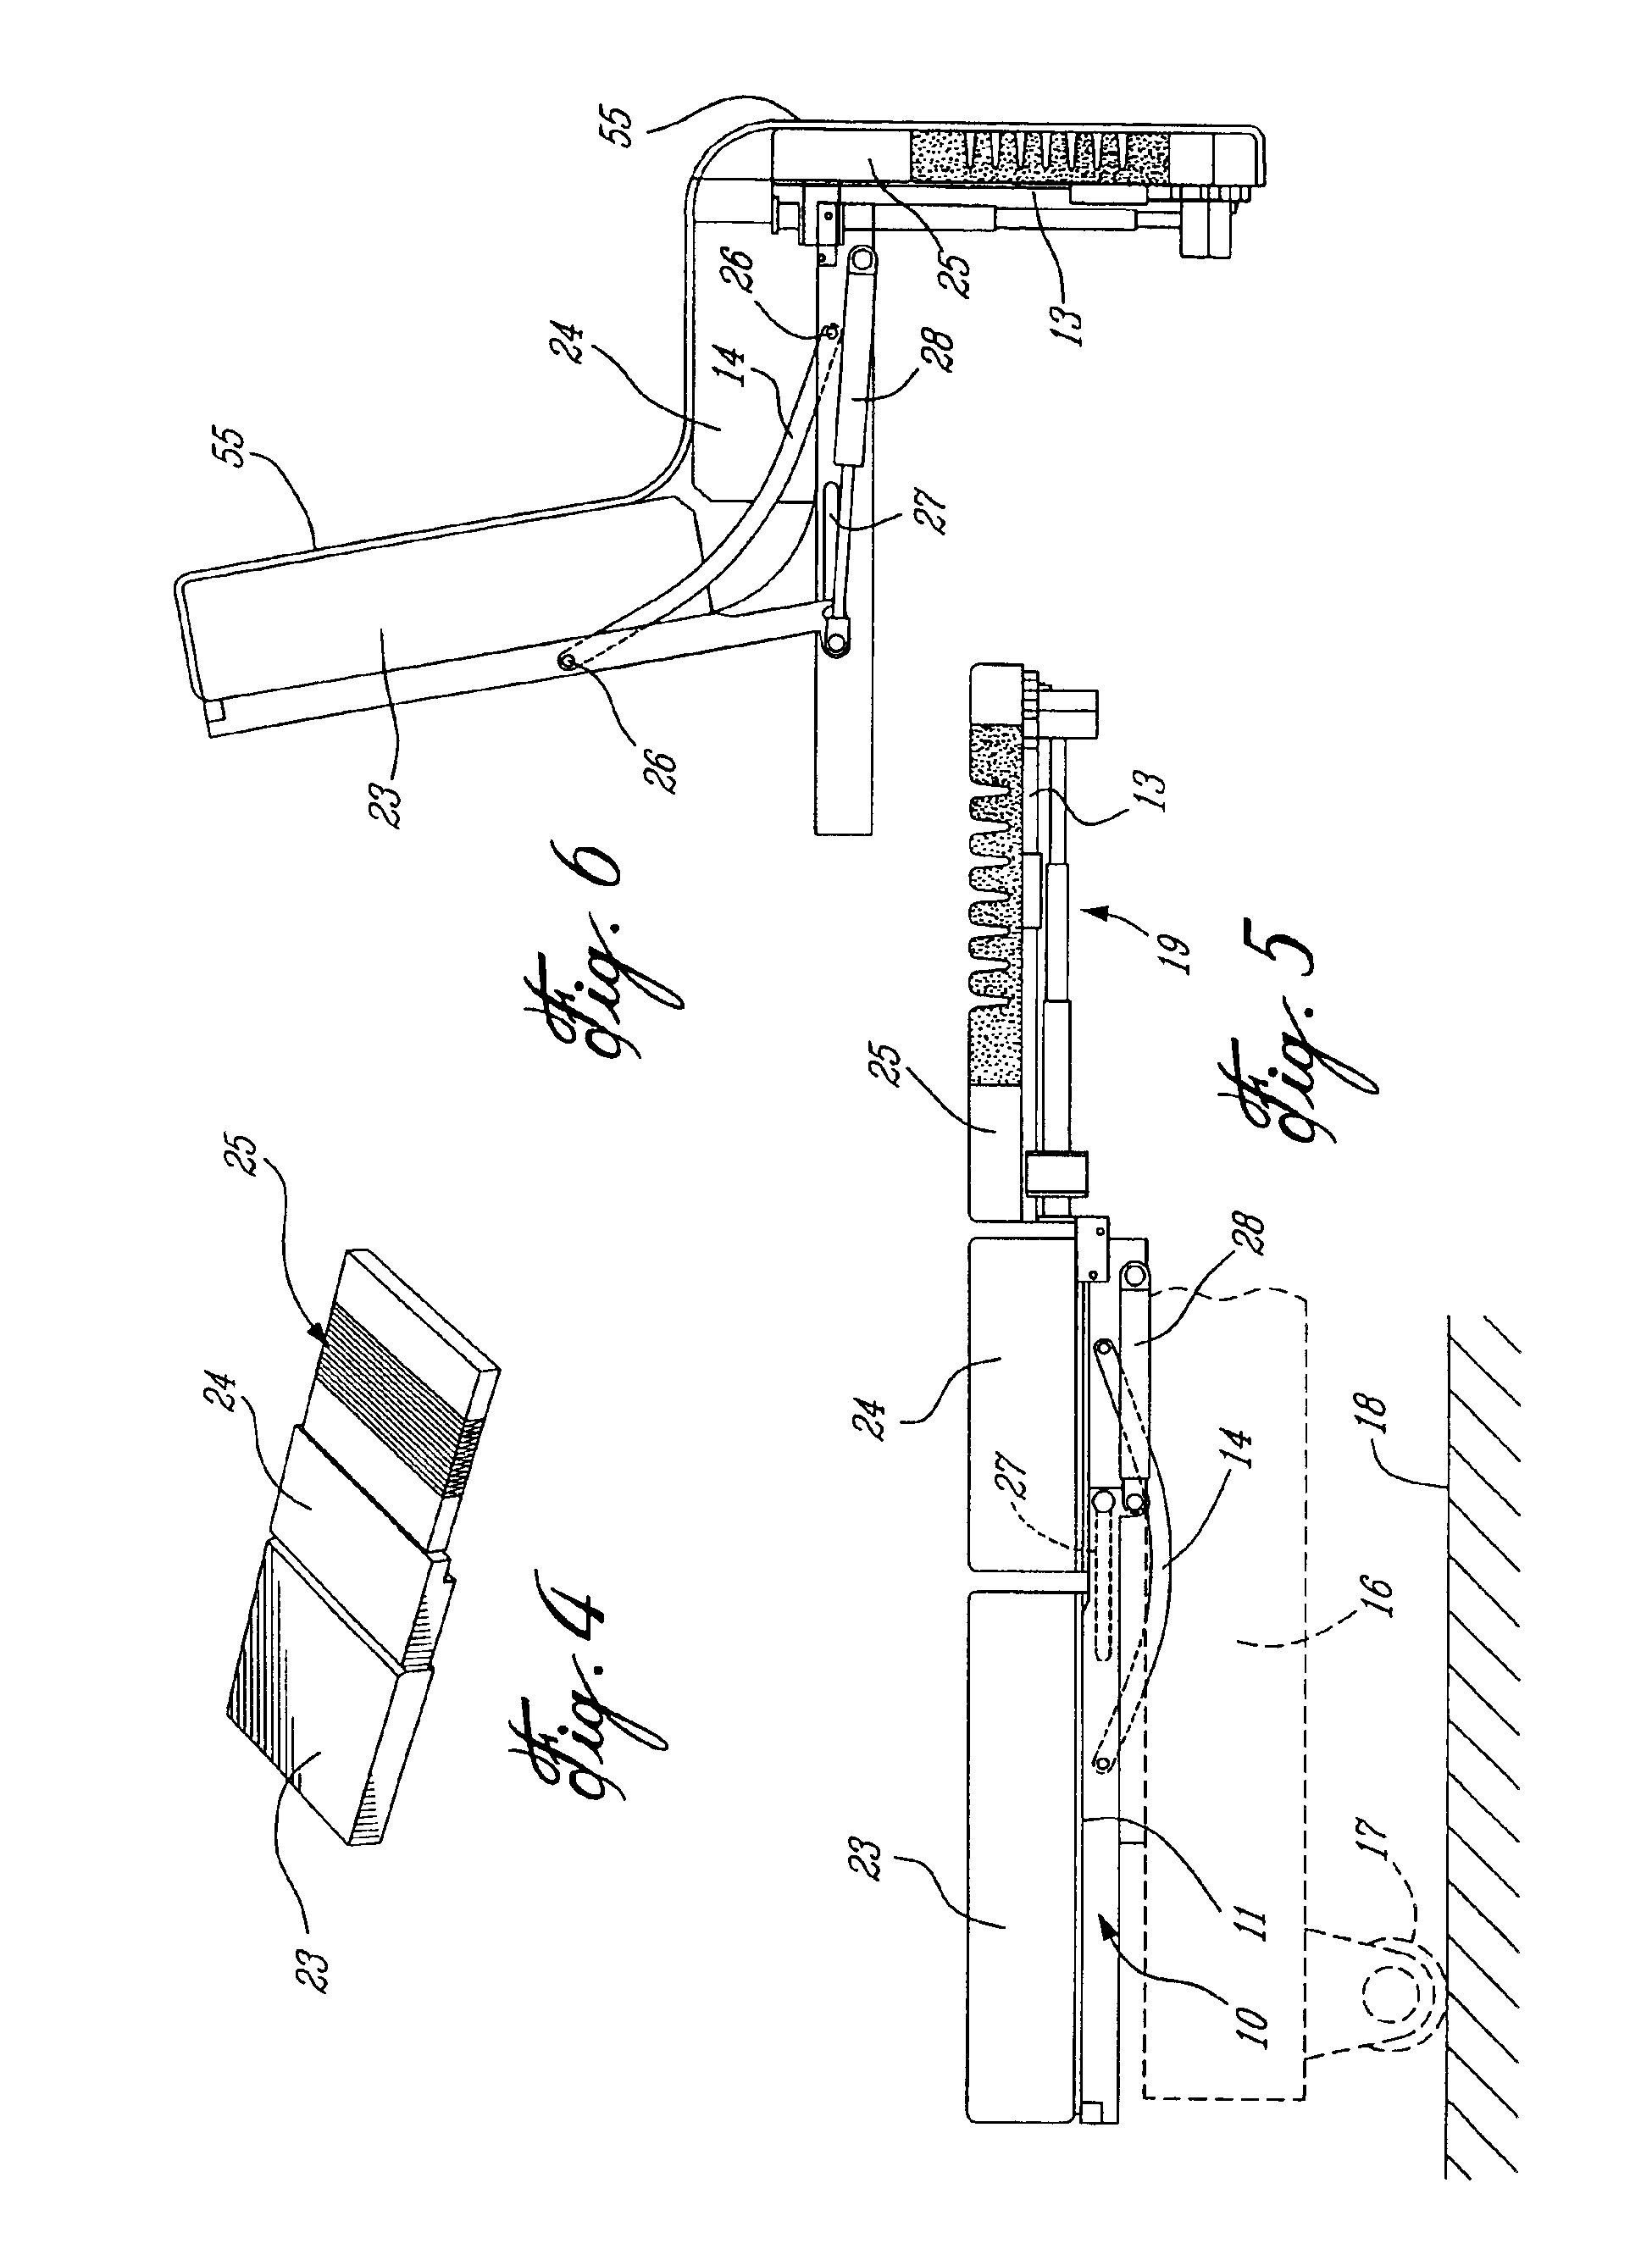 Mattress leg rest section for an articulatable bed convertible to a chair position